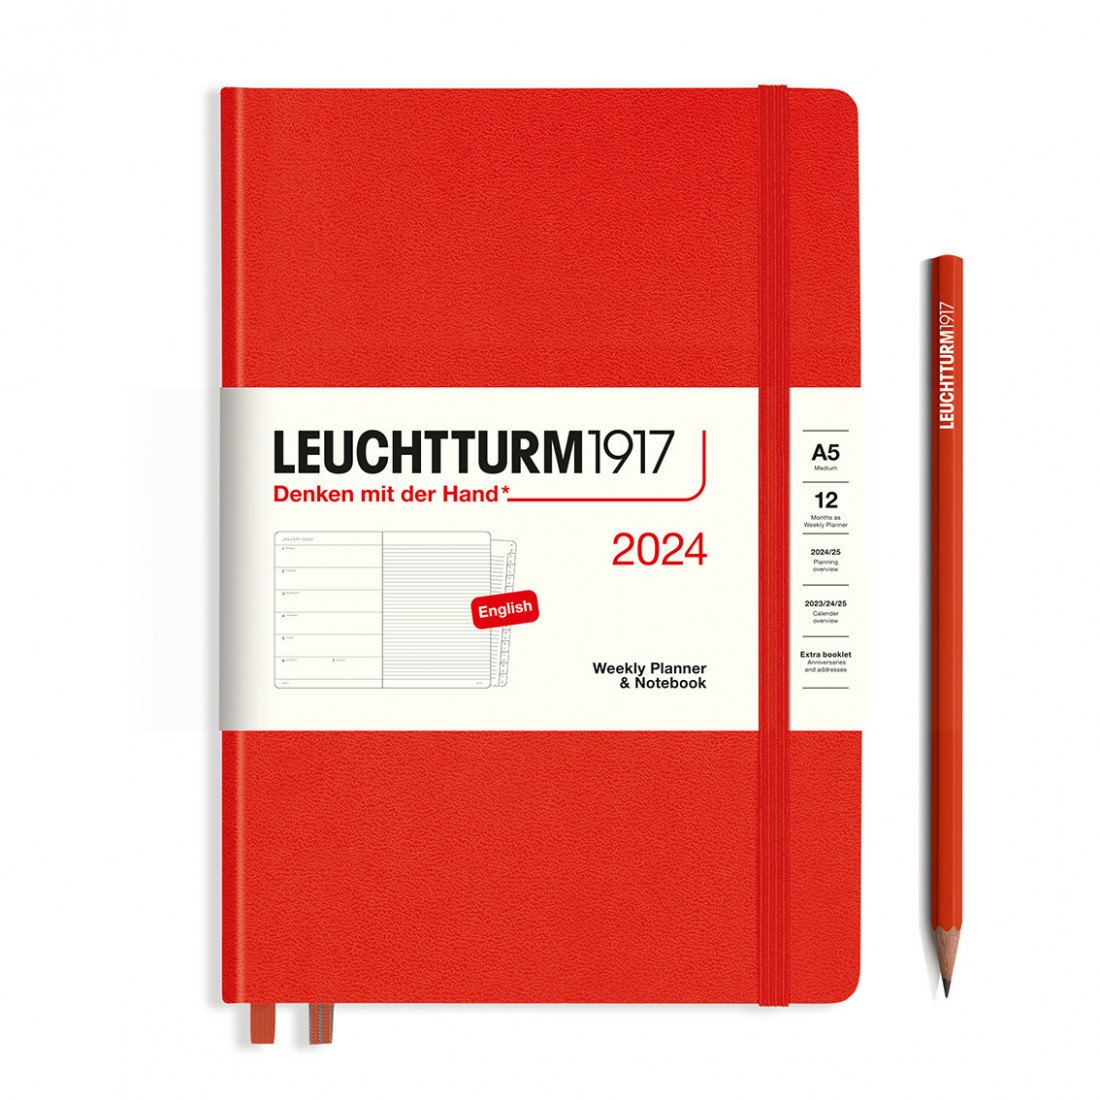 Leuchtturm 1917 Weekly Planner and Notebook 2024 Fox Red Medium A5 Hard Cover